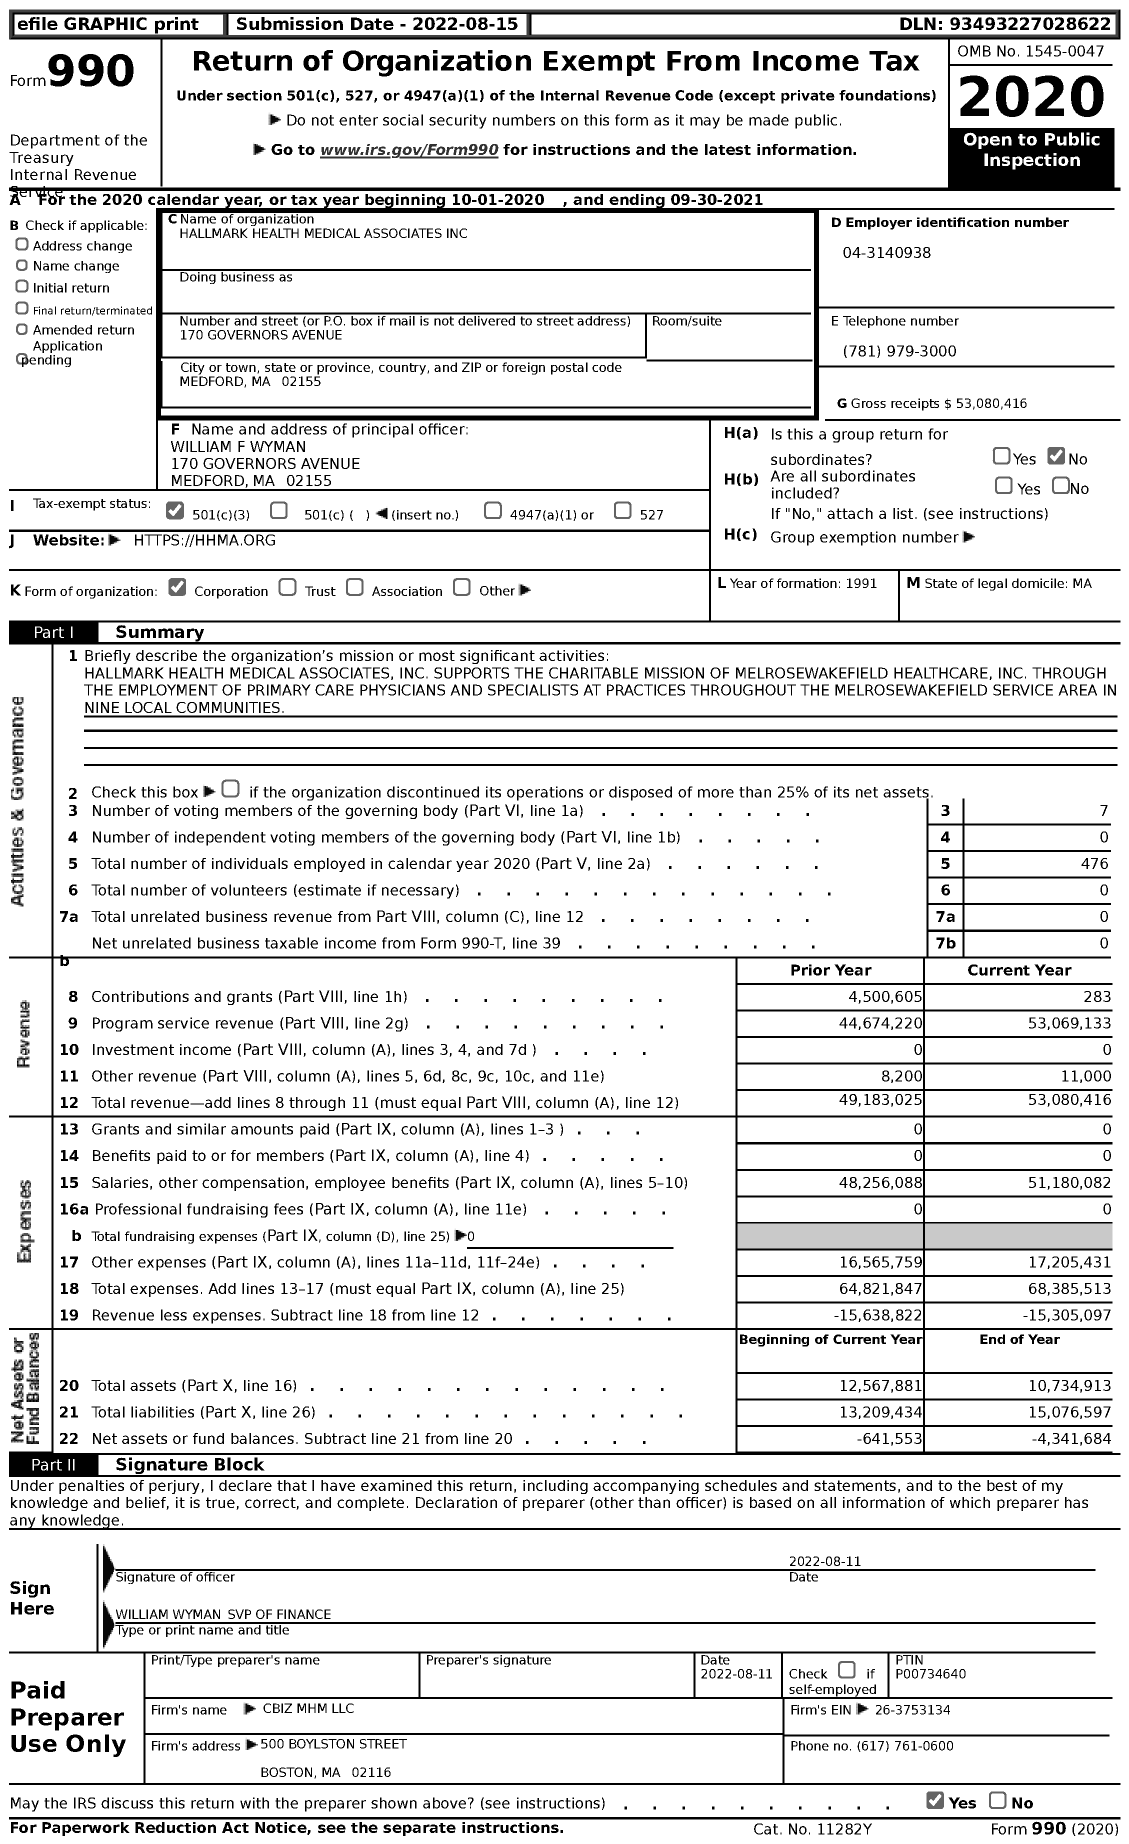 Image of first page of 2020 Form 990 for Hallmark Health Medical Associates (HHMA)